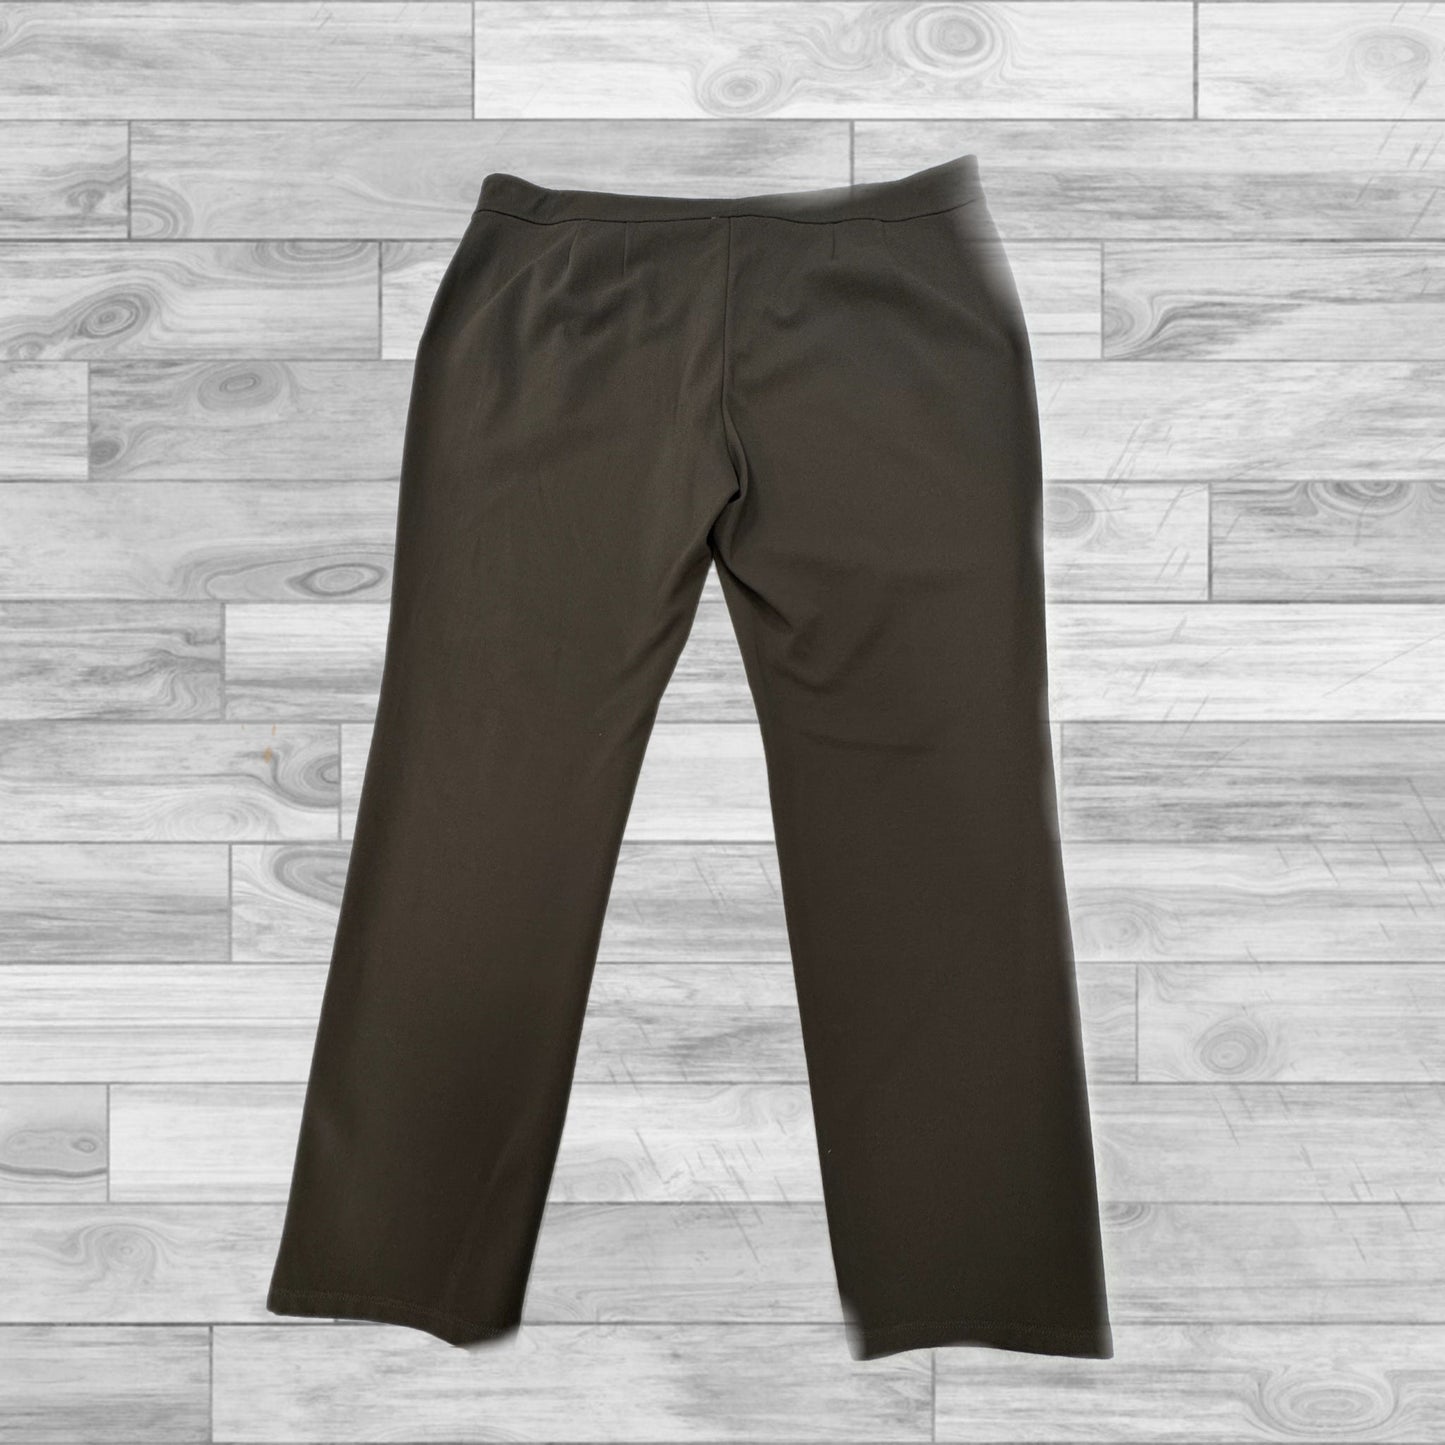 Brown Pants Eileen Fisher, Size 2x